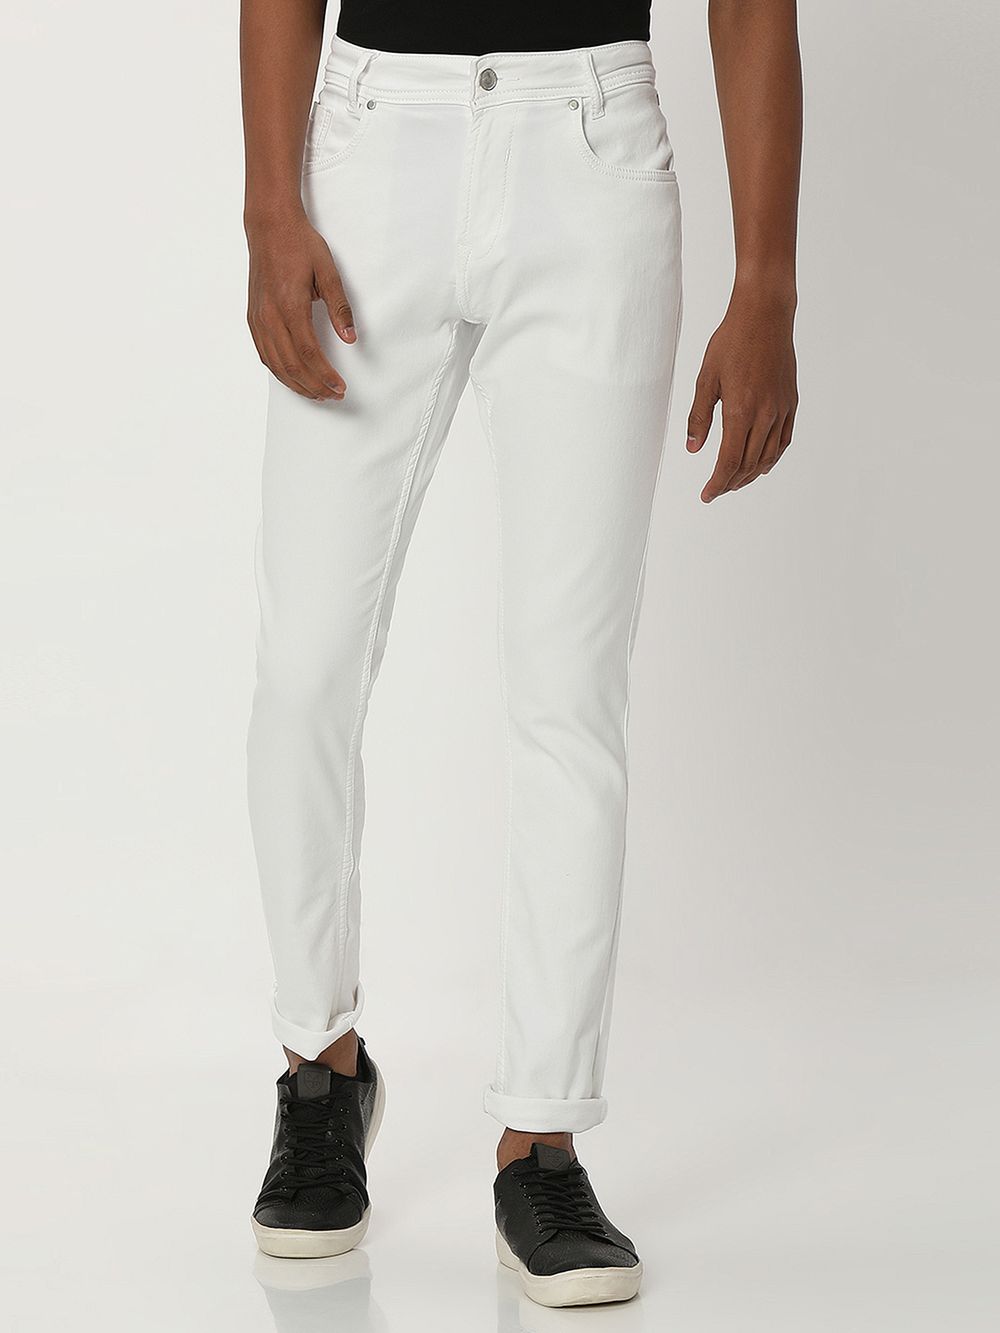 White Skinny Fit Denim Deluxe Stretch Jeans